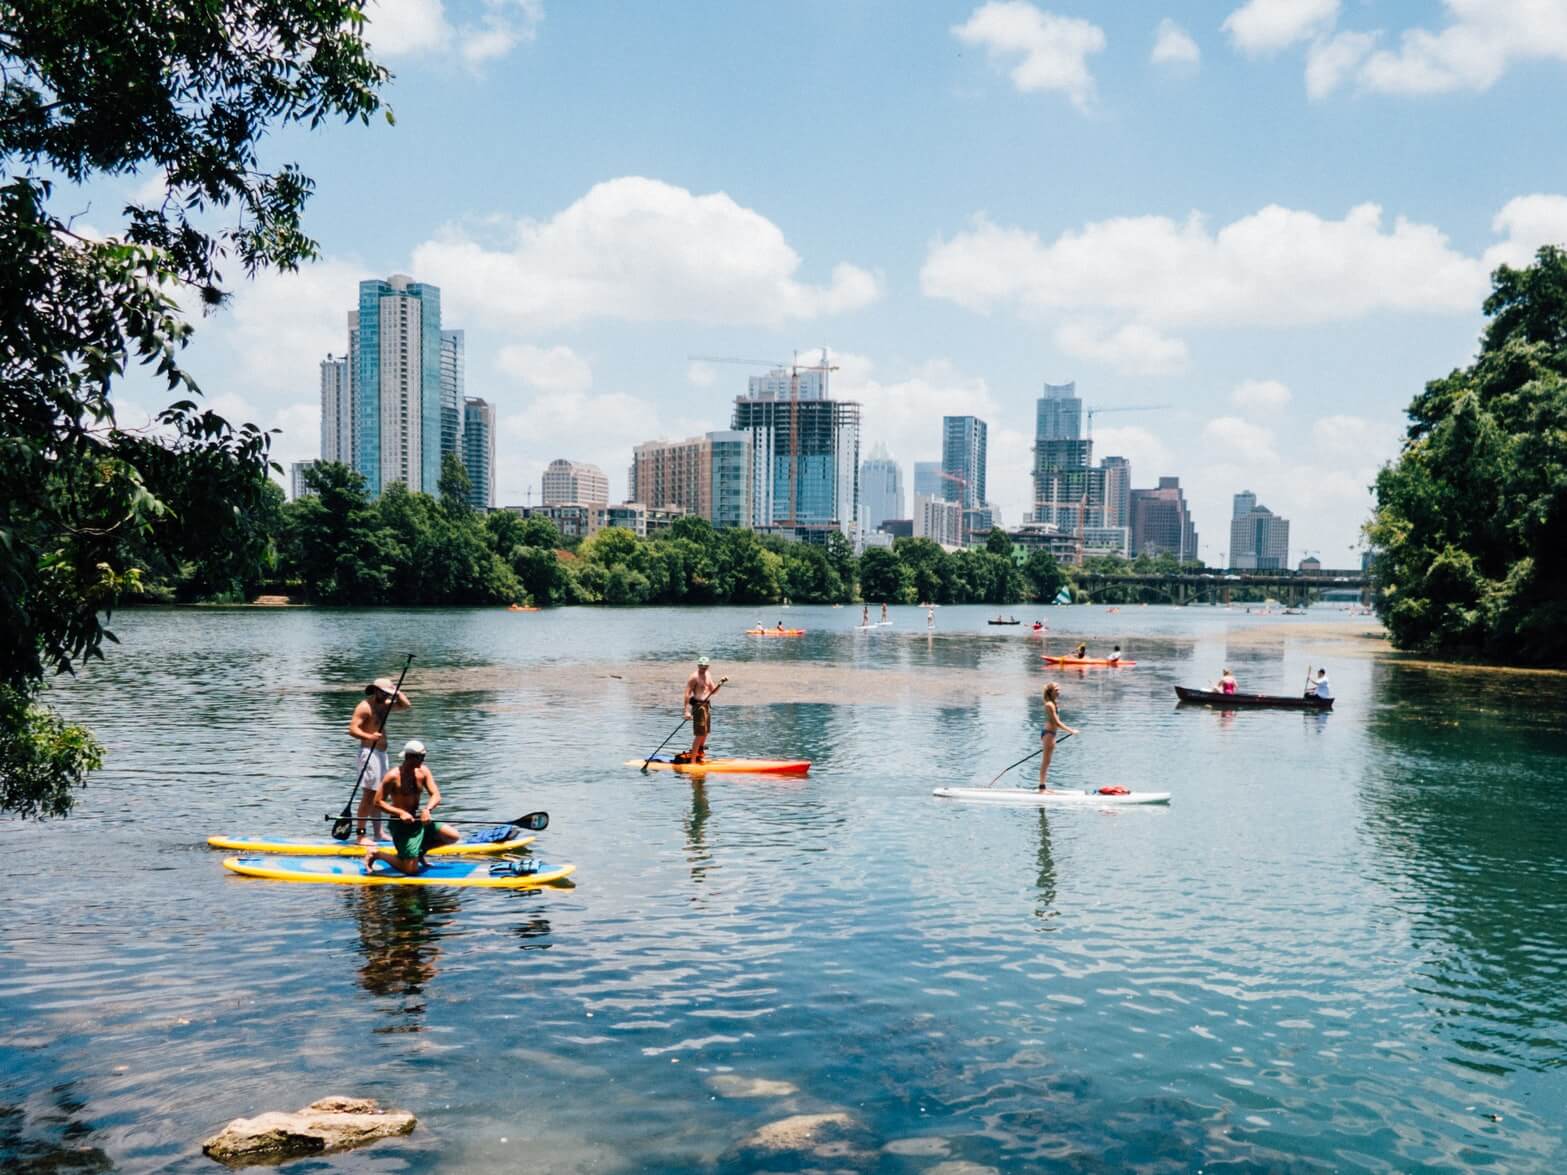 things to do in austin: paddleboard